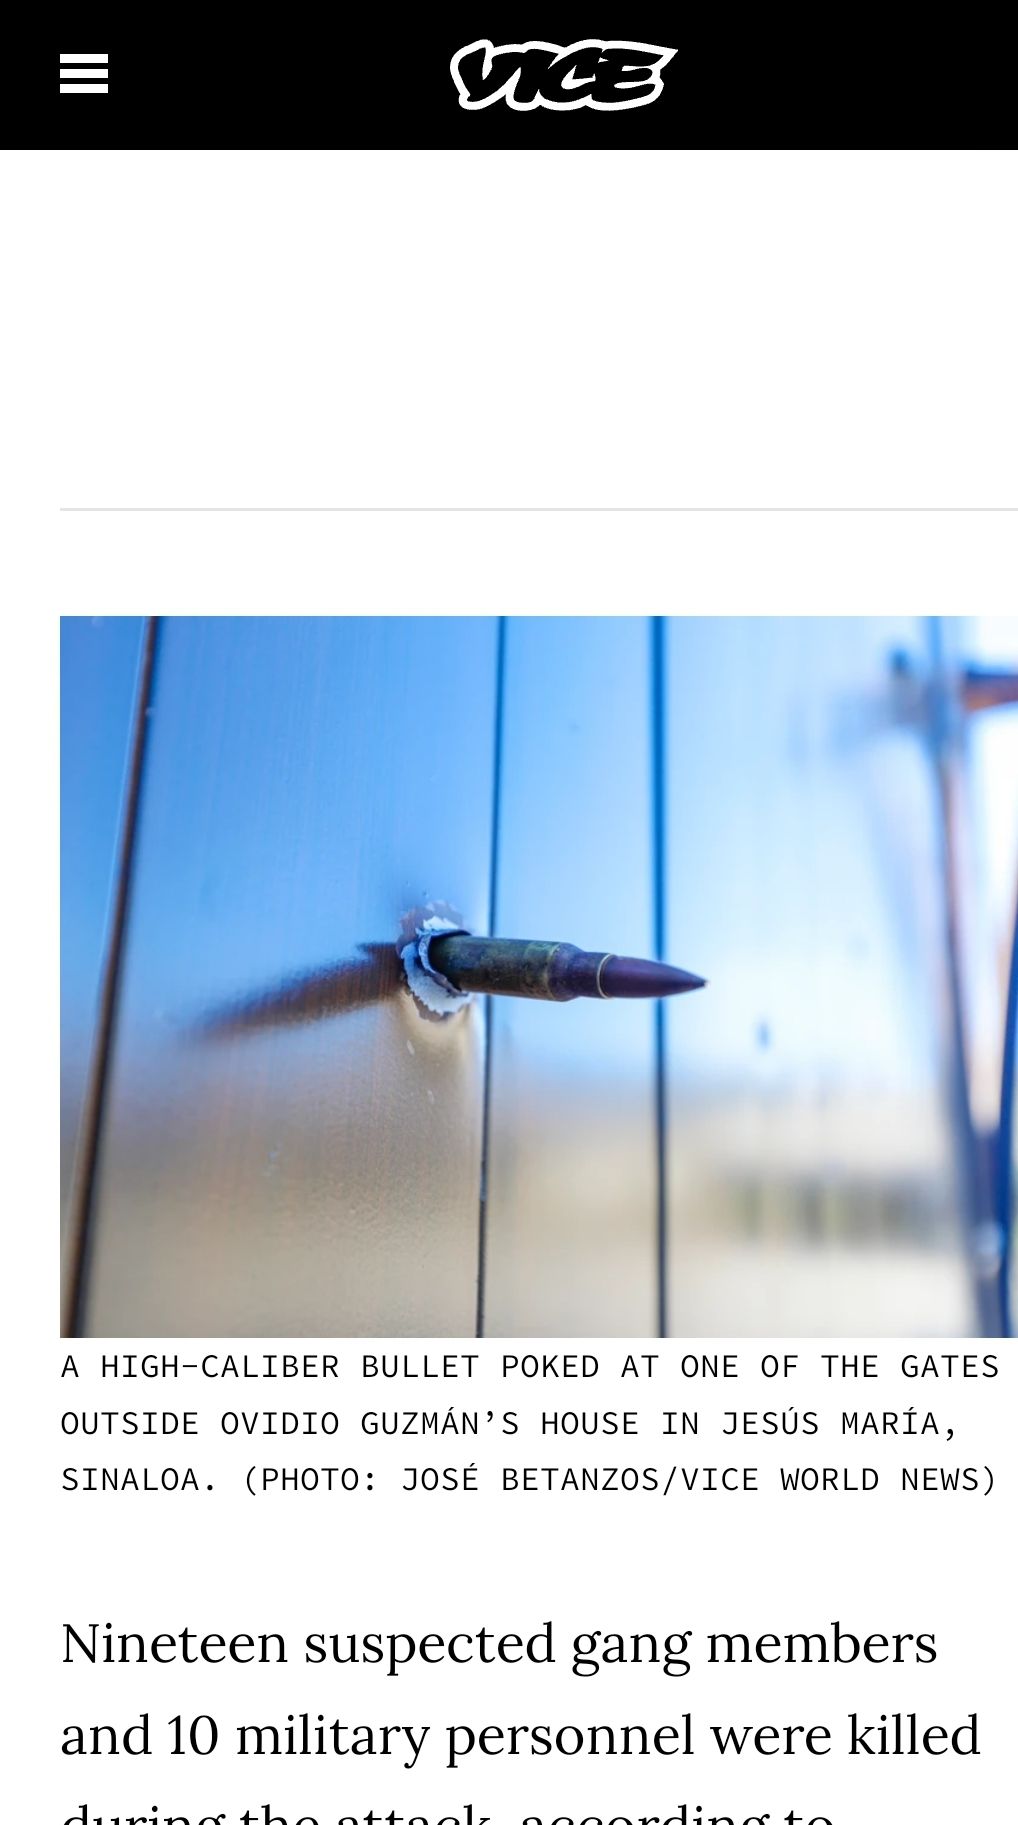 Umm, vice? That's not how bullets work